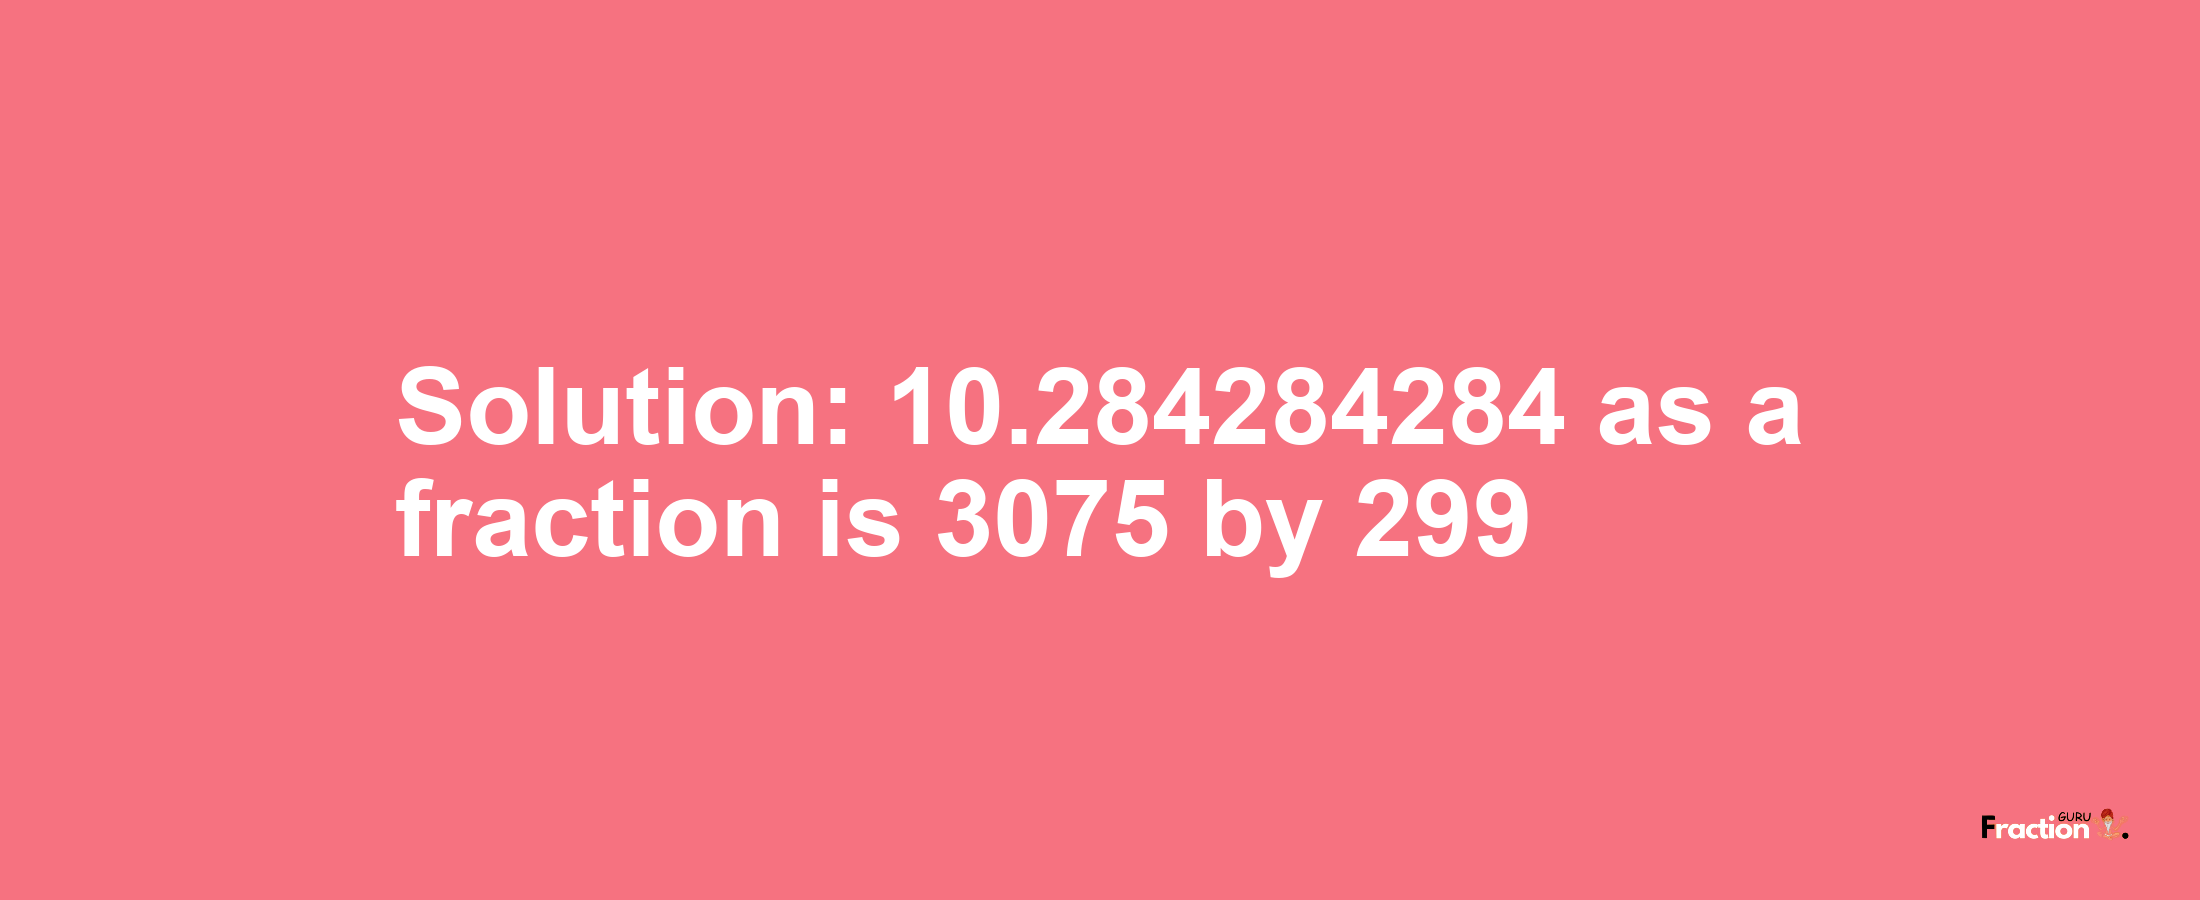 Solution:10.284284284 as a fraction is 3075/299